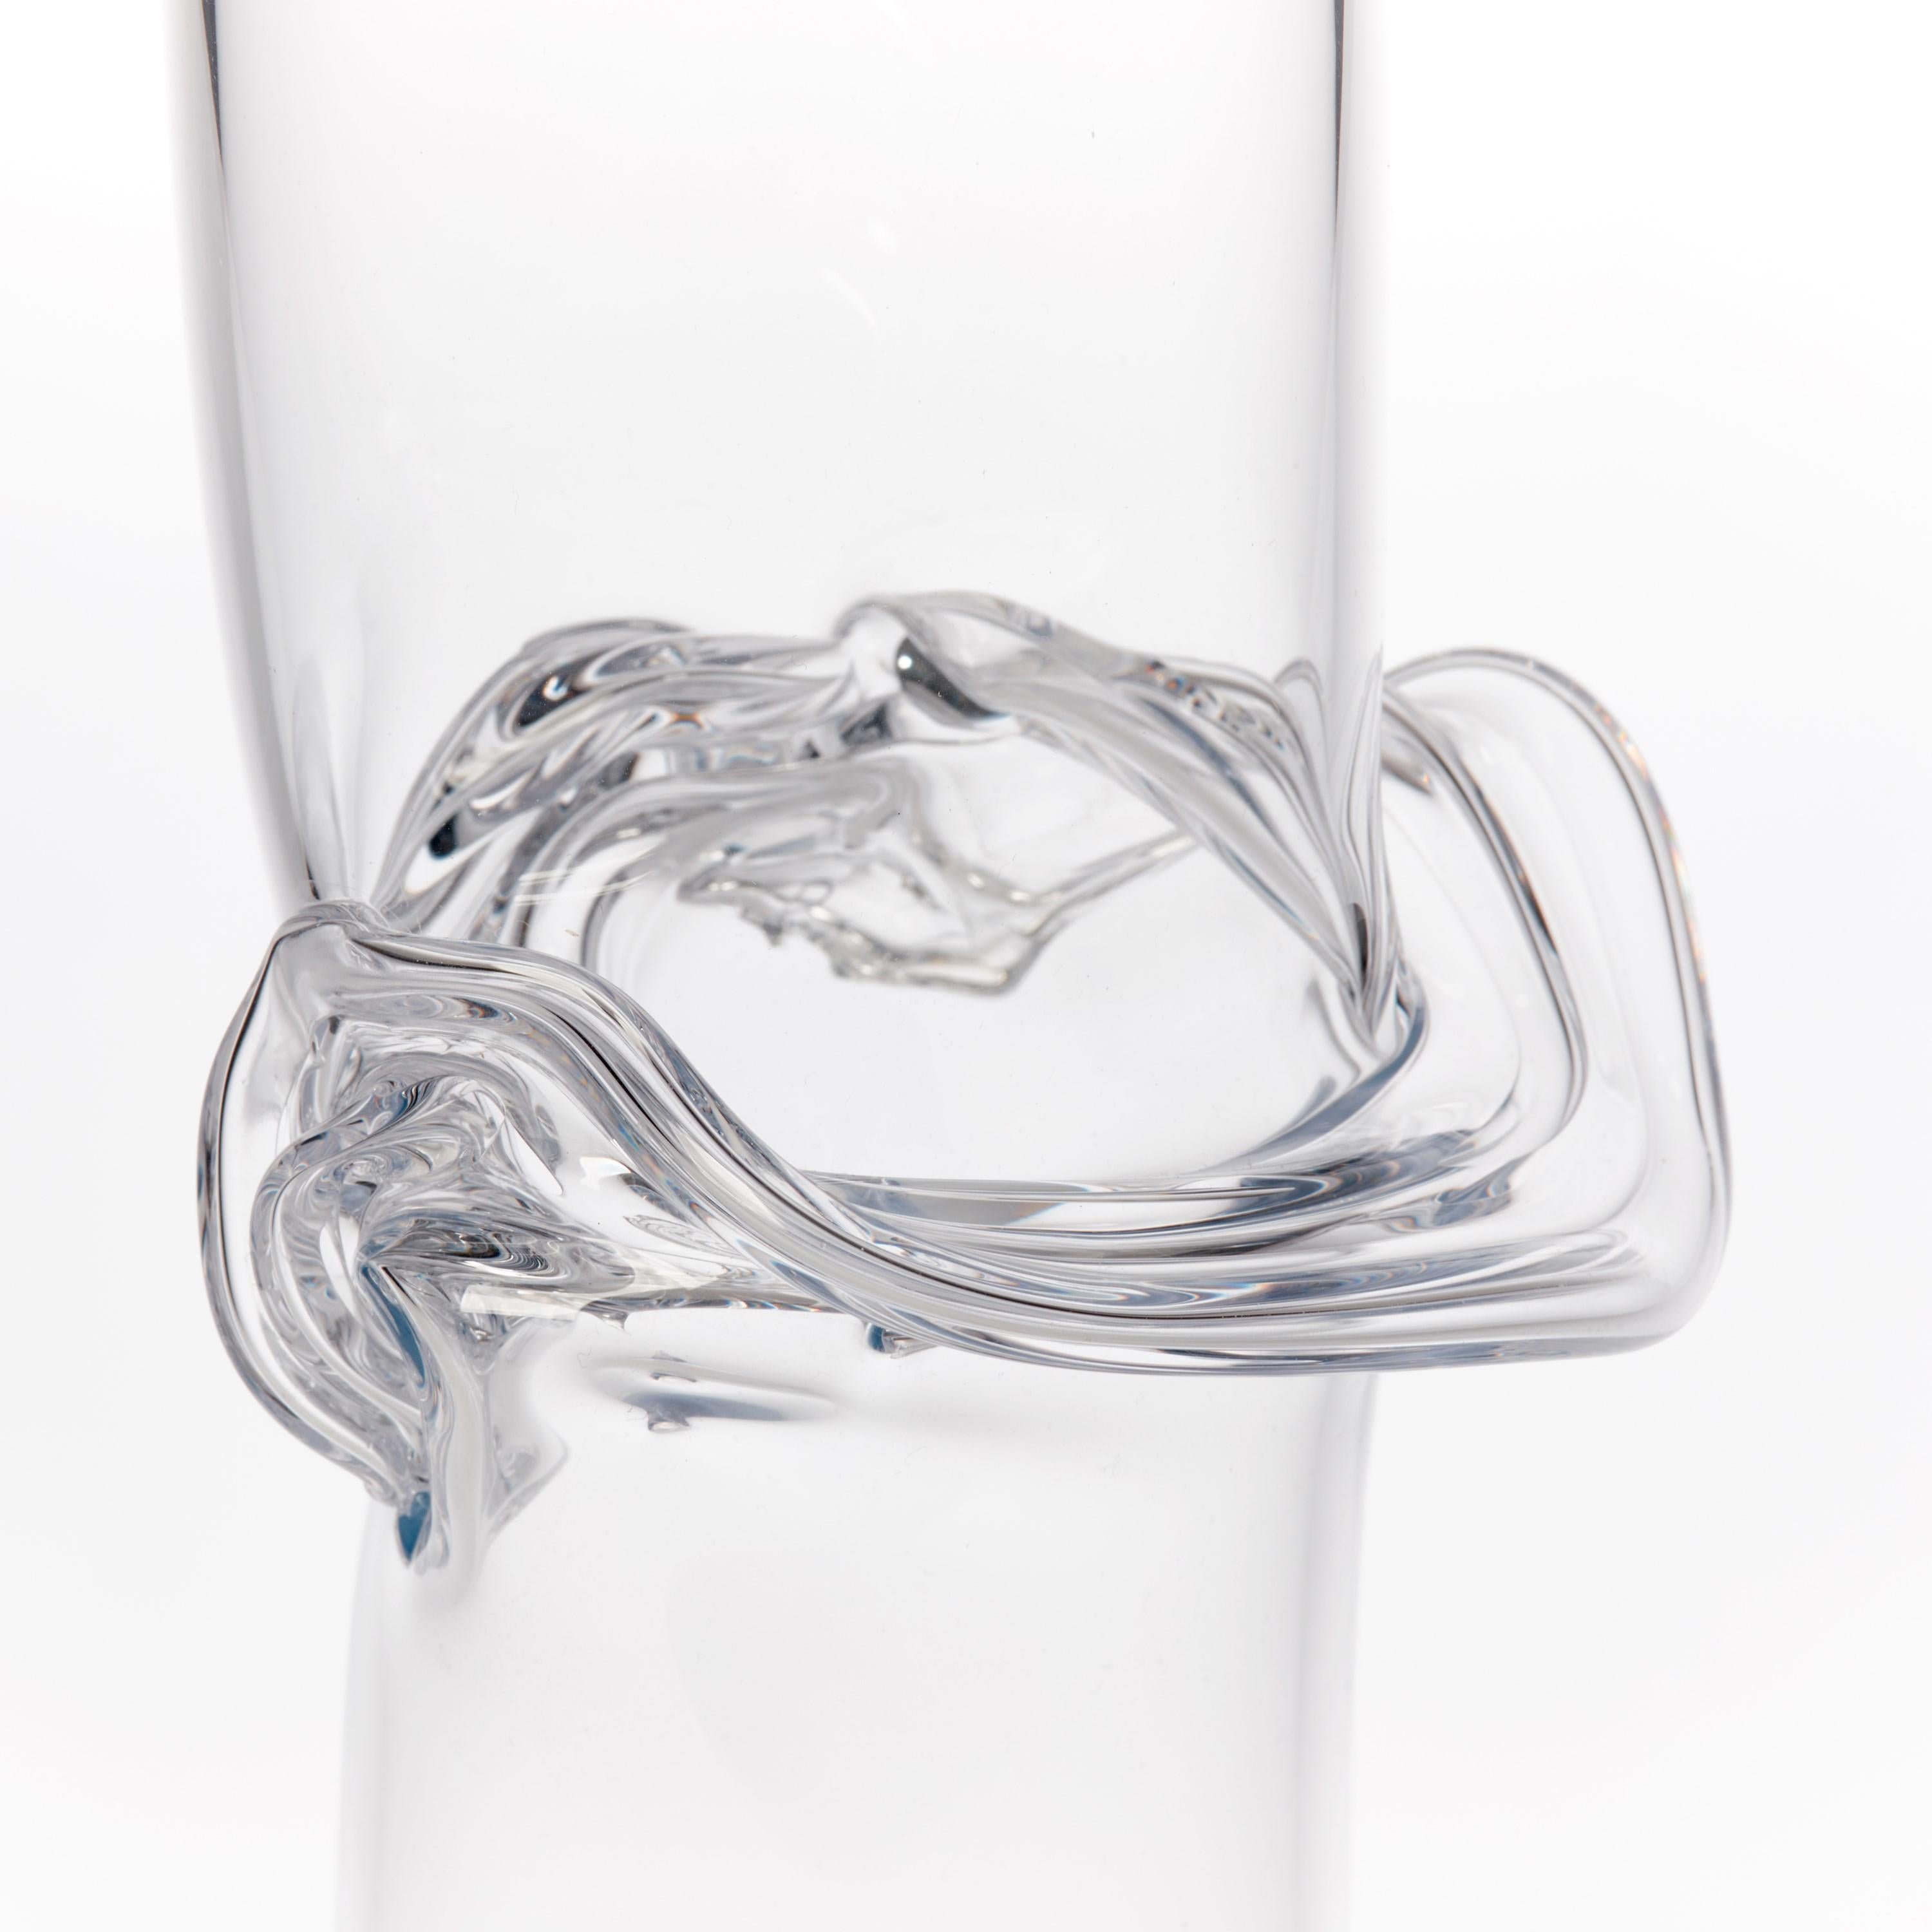 Organic Modern Torsion in Clear 22/02, abstract sculptural handblown glass vessel by Emma Baker For Sale